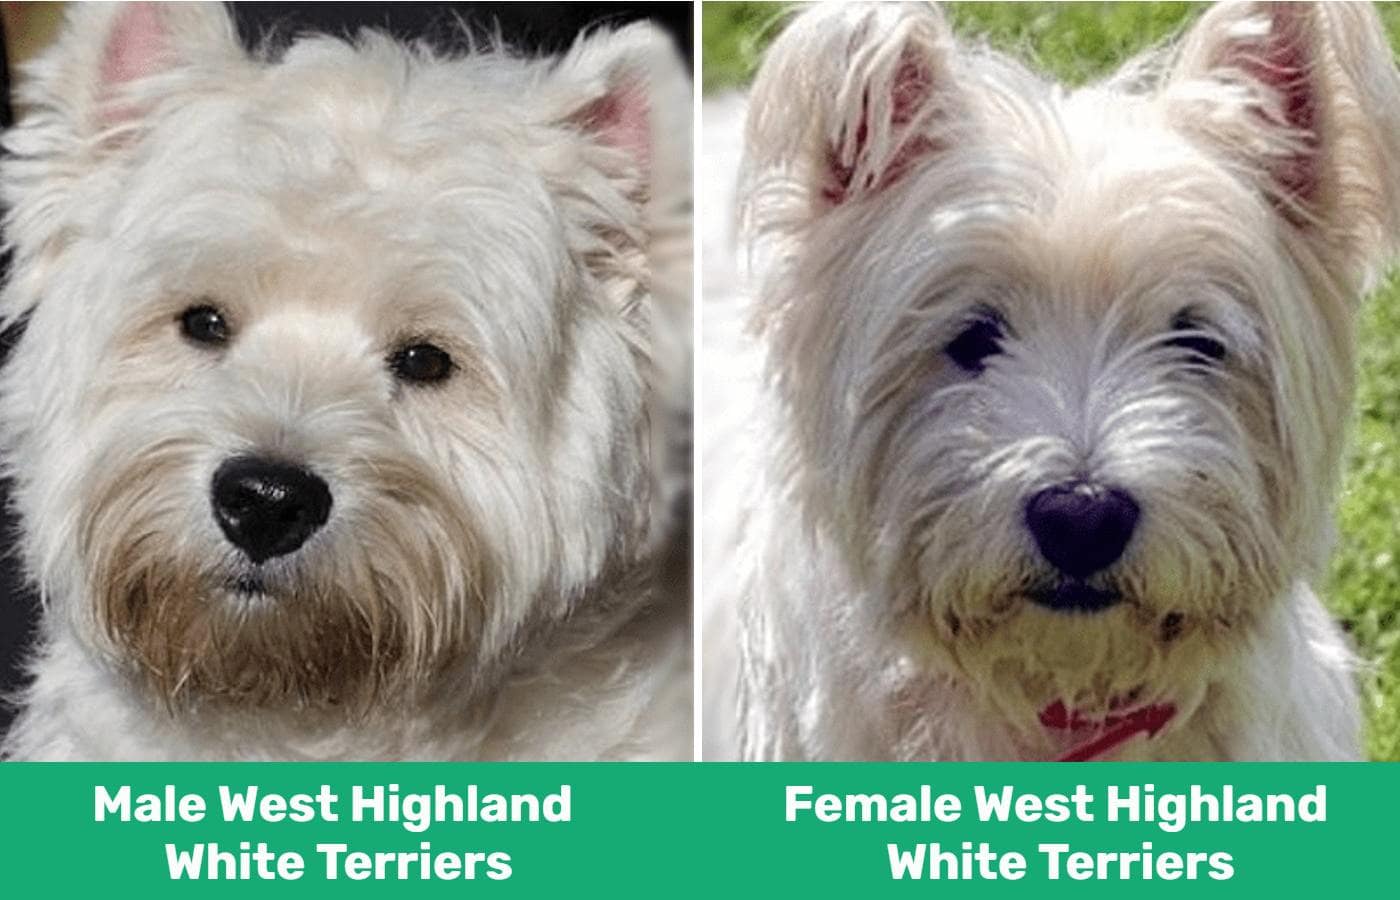 Male vs Female West Highland White Terriers - close up